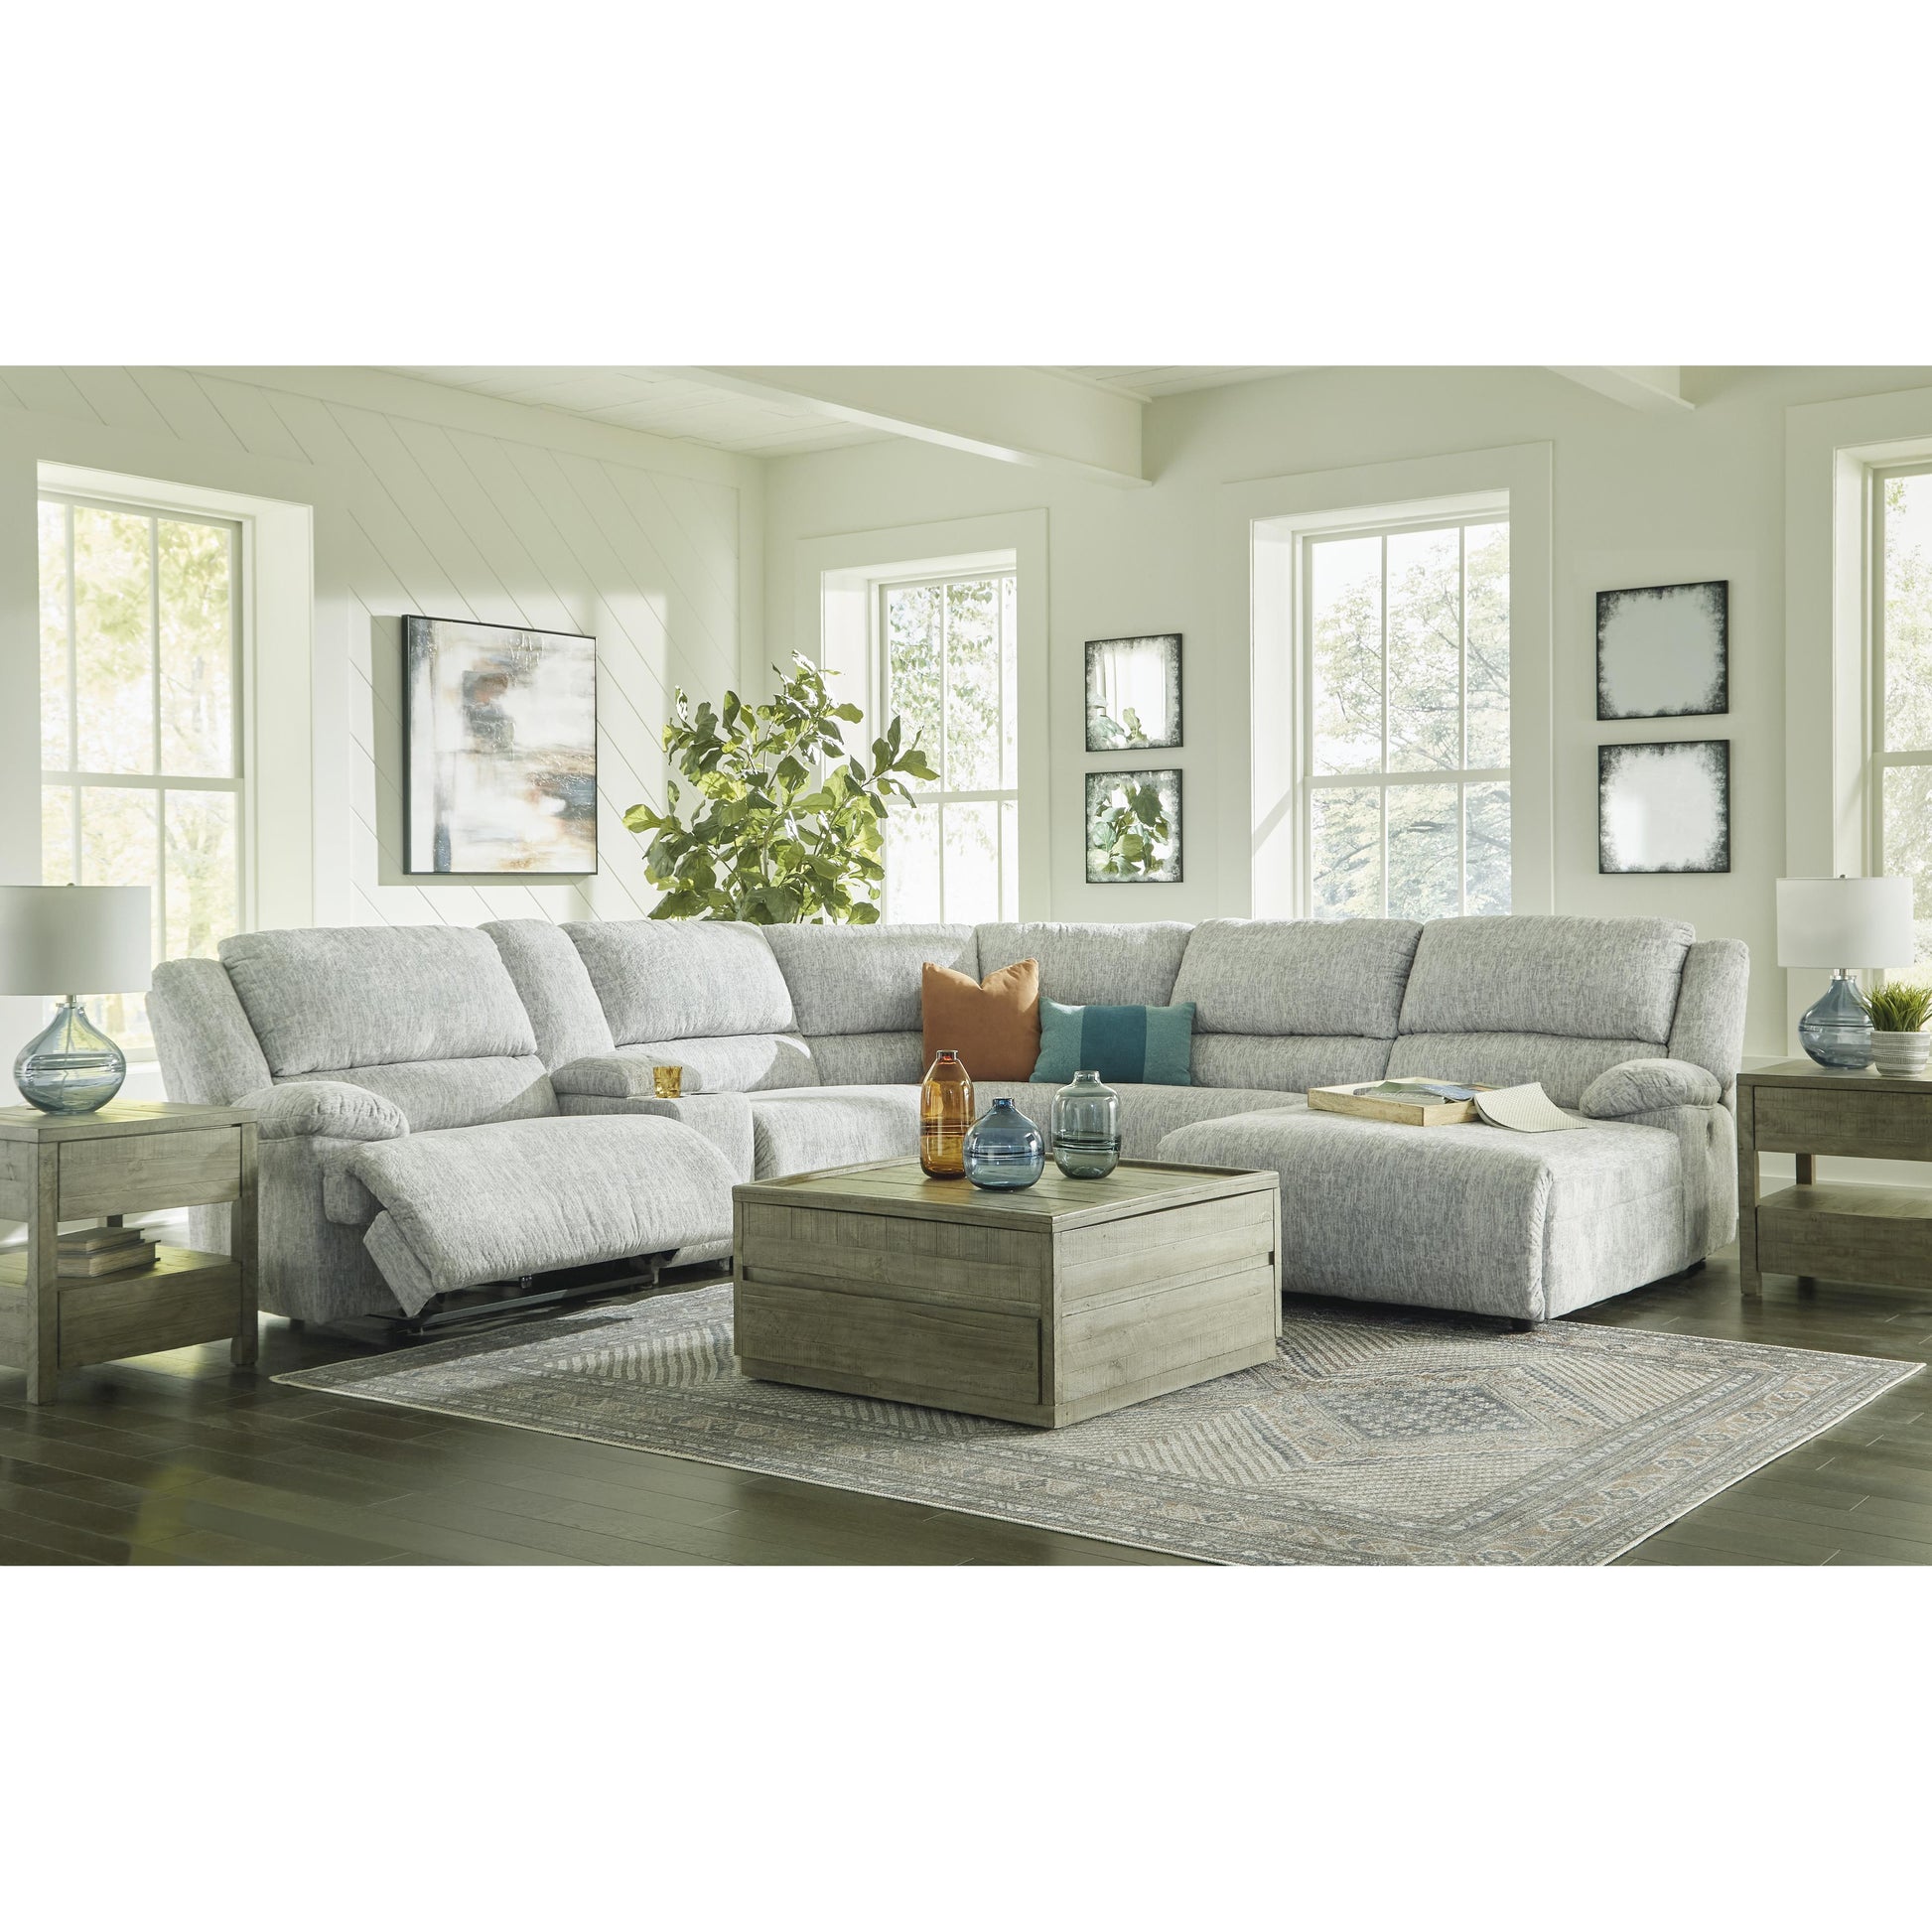 Signature Design by Ashley McClelland Power Reclining Fabric 6 pc Sectional 2930258/2930257/2930219/2930277/2930246/2930297 IMAGE 5